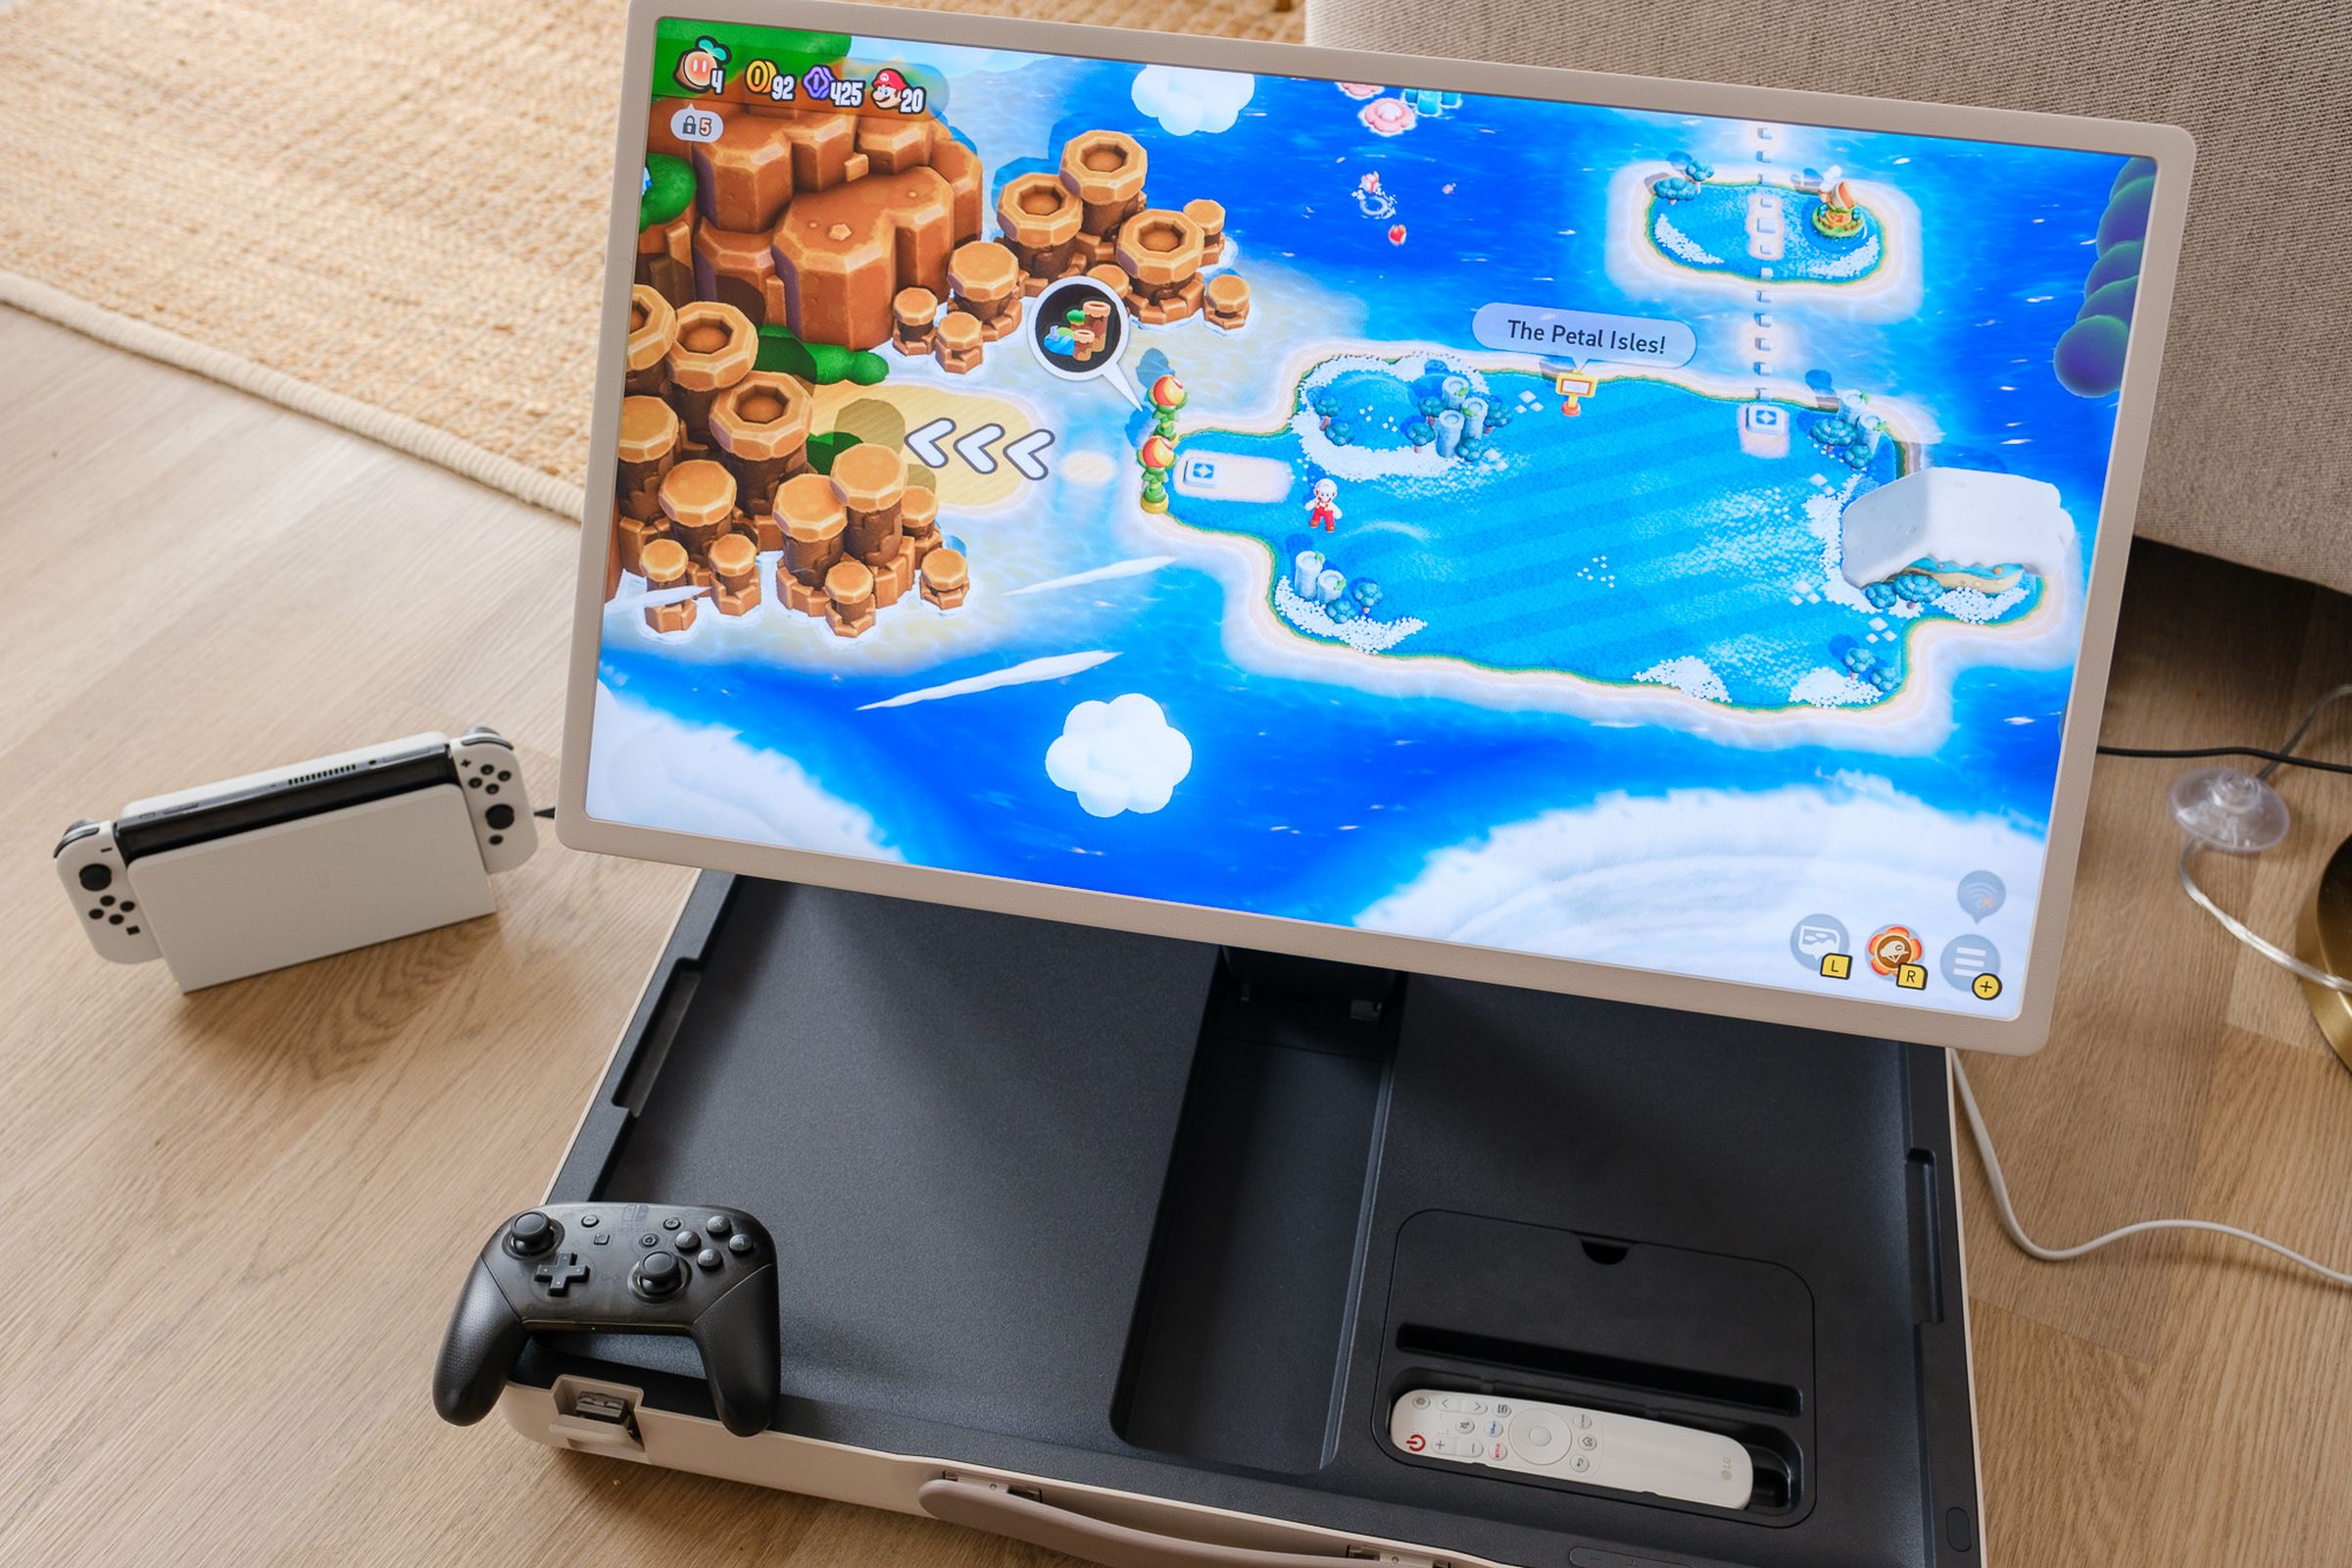 A photo of LG’s StanbyME Go briefcase TV being used alongside a Nintendo Switch OLED gaming console.